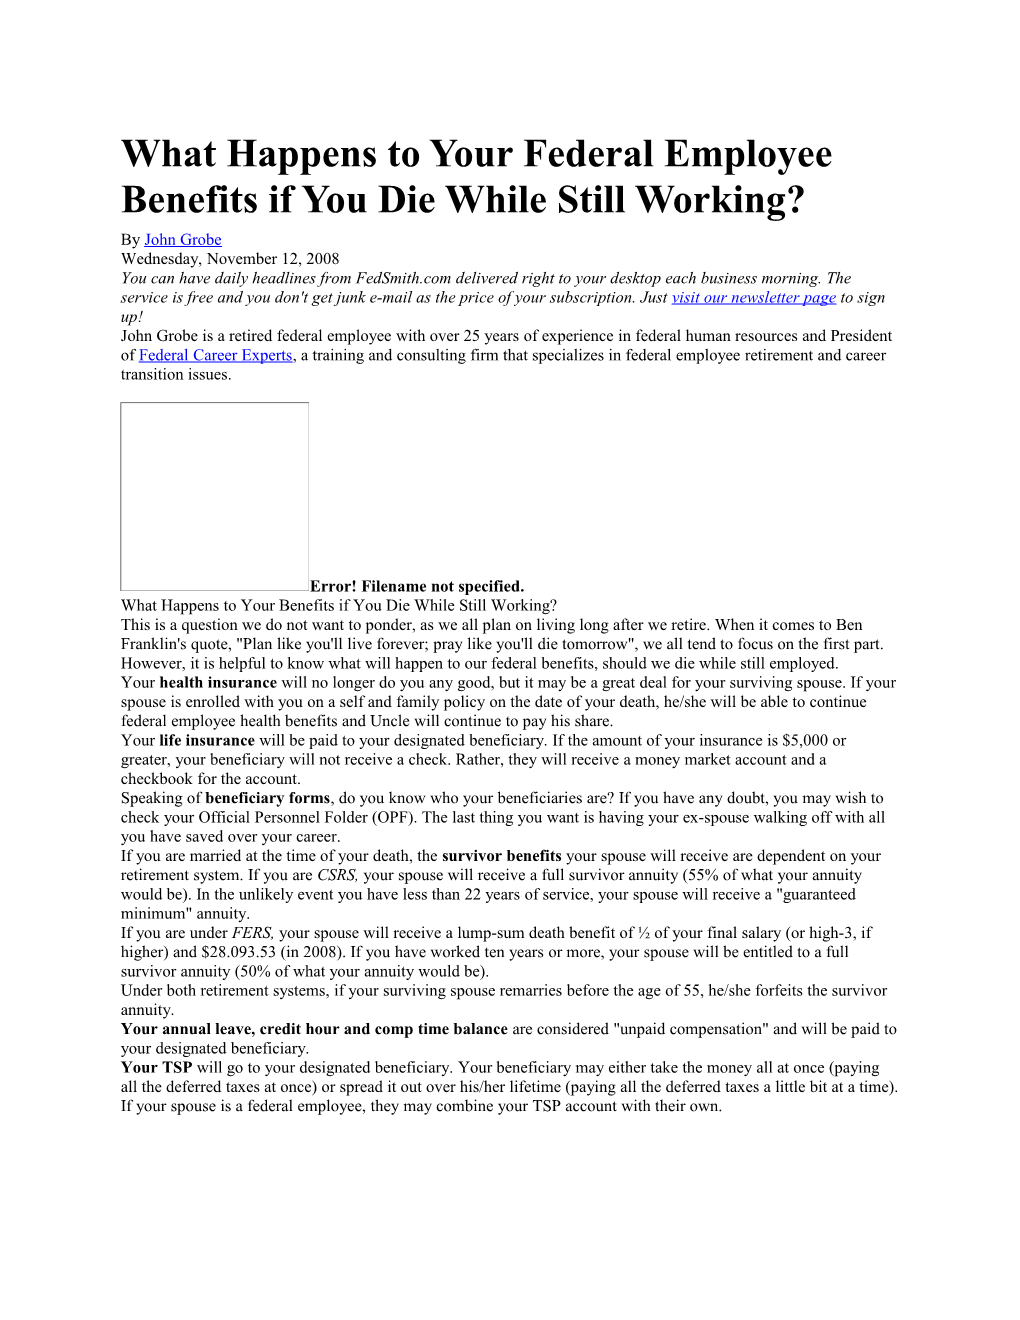 What Happens to Your Federal Employee Benefits If You Die While Still Working